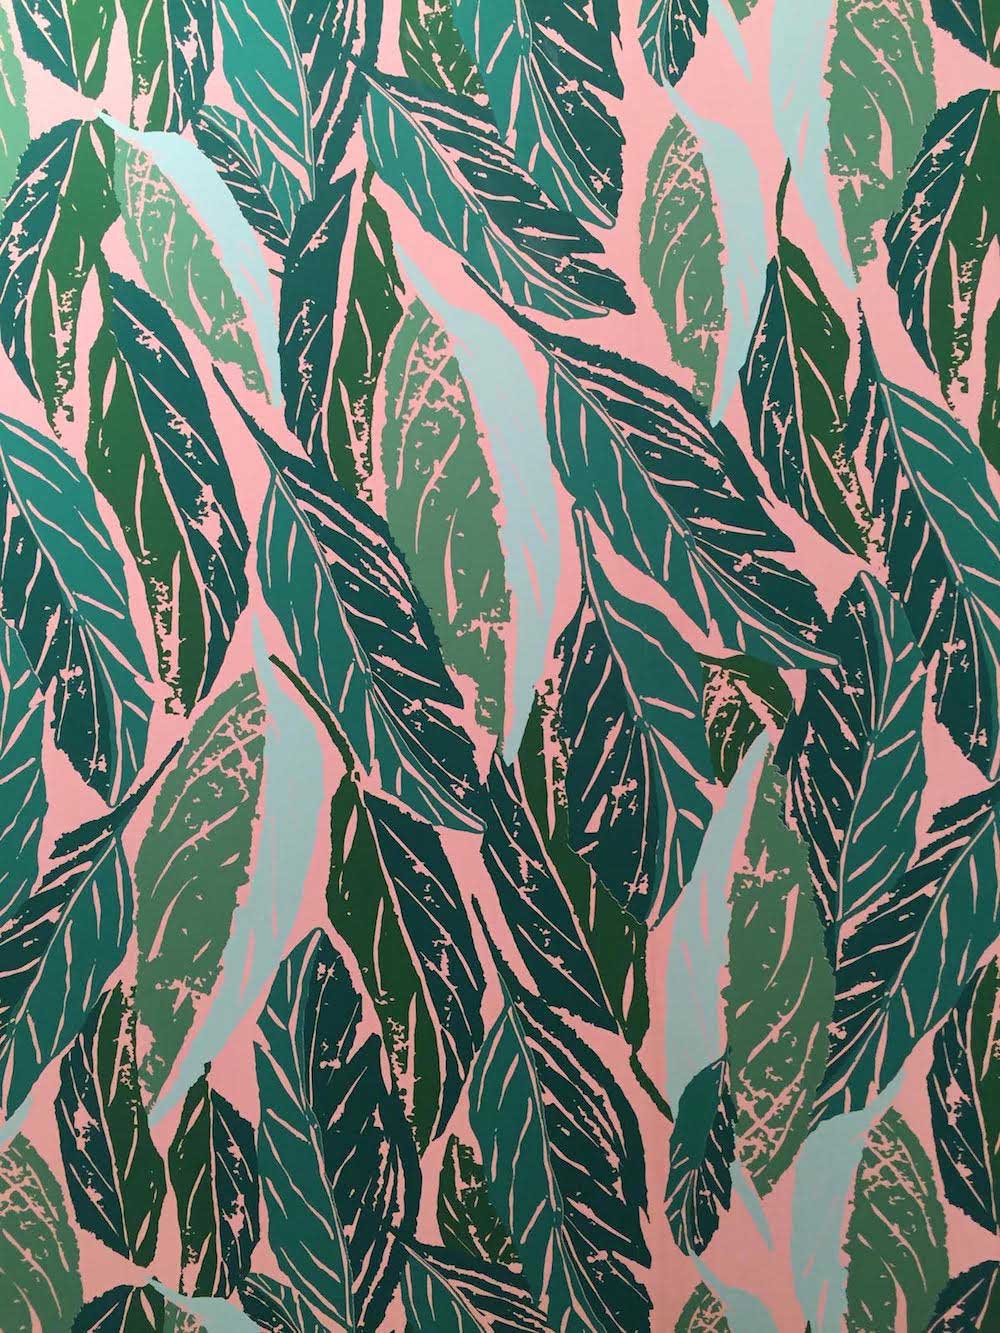 Hygge West S Nana Wallpaper Features Screen Printed Stylized